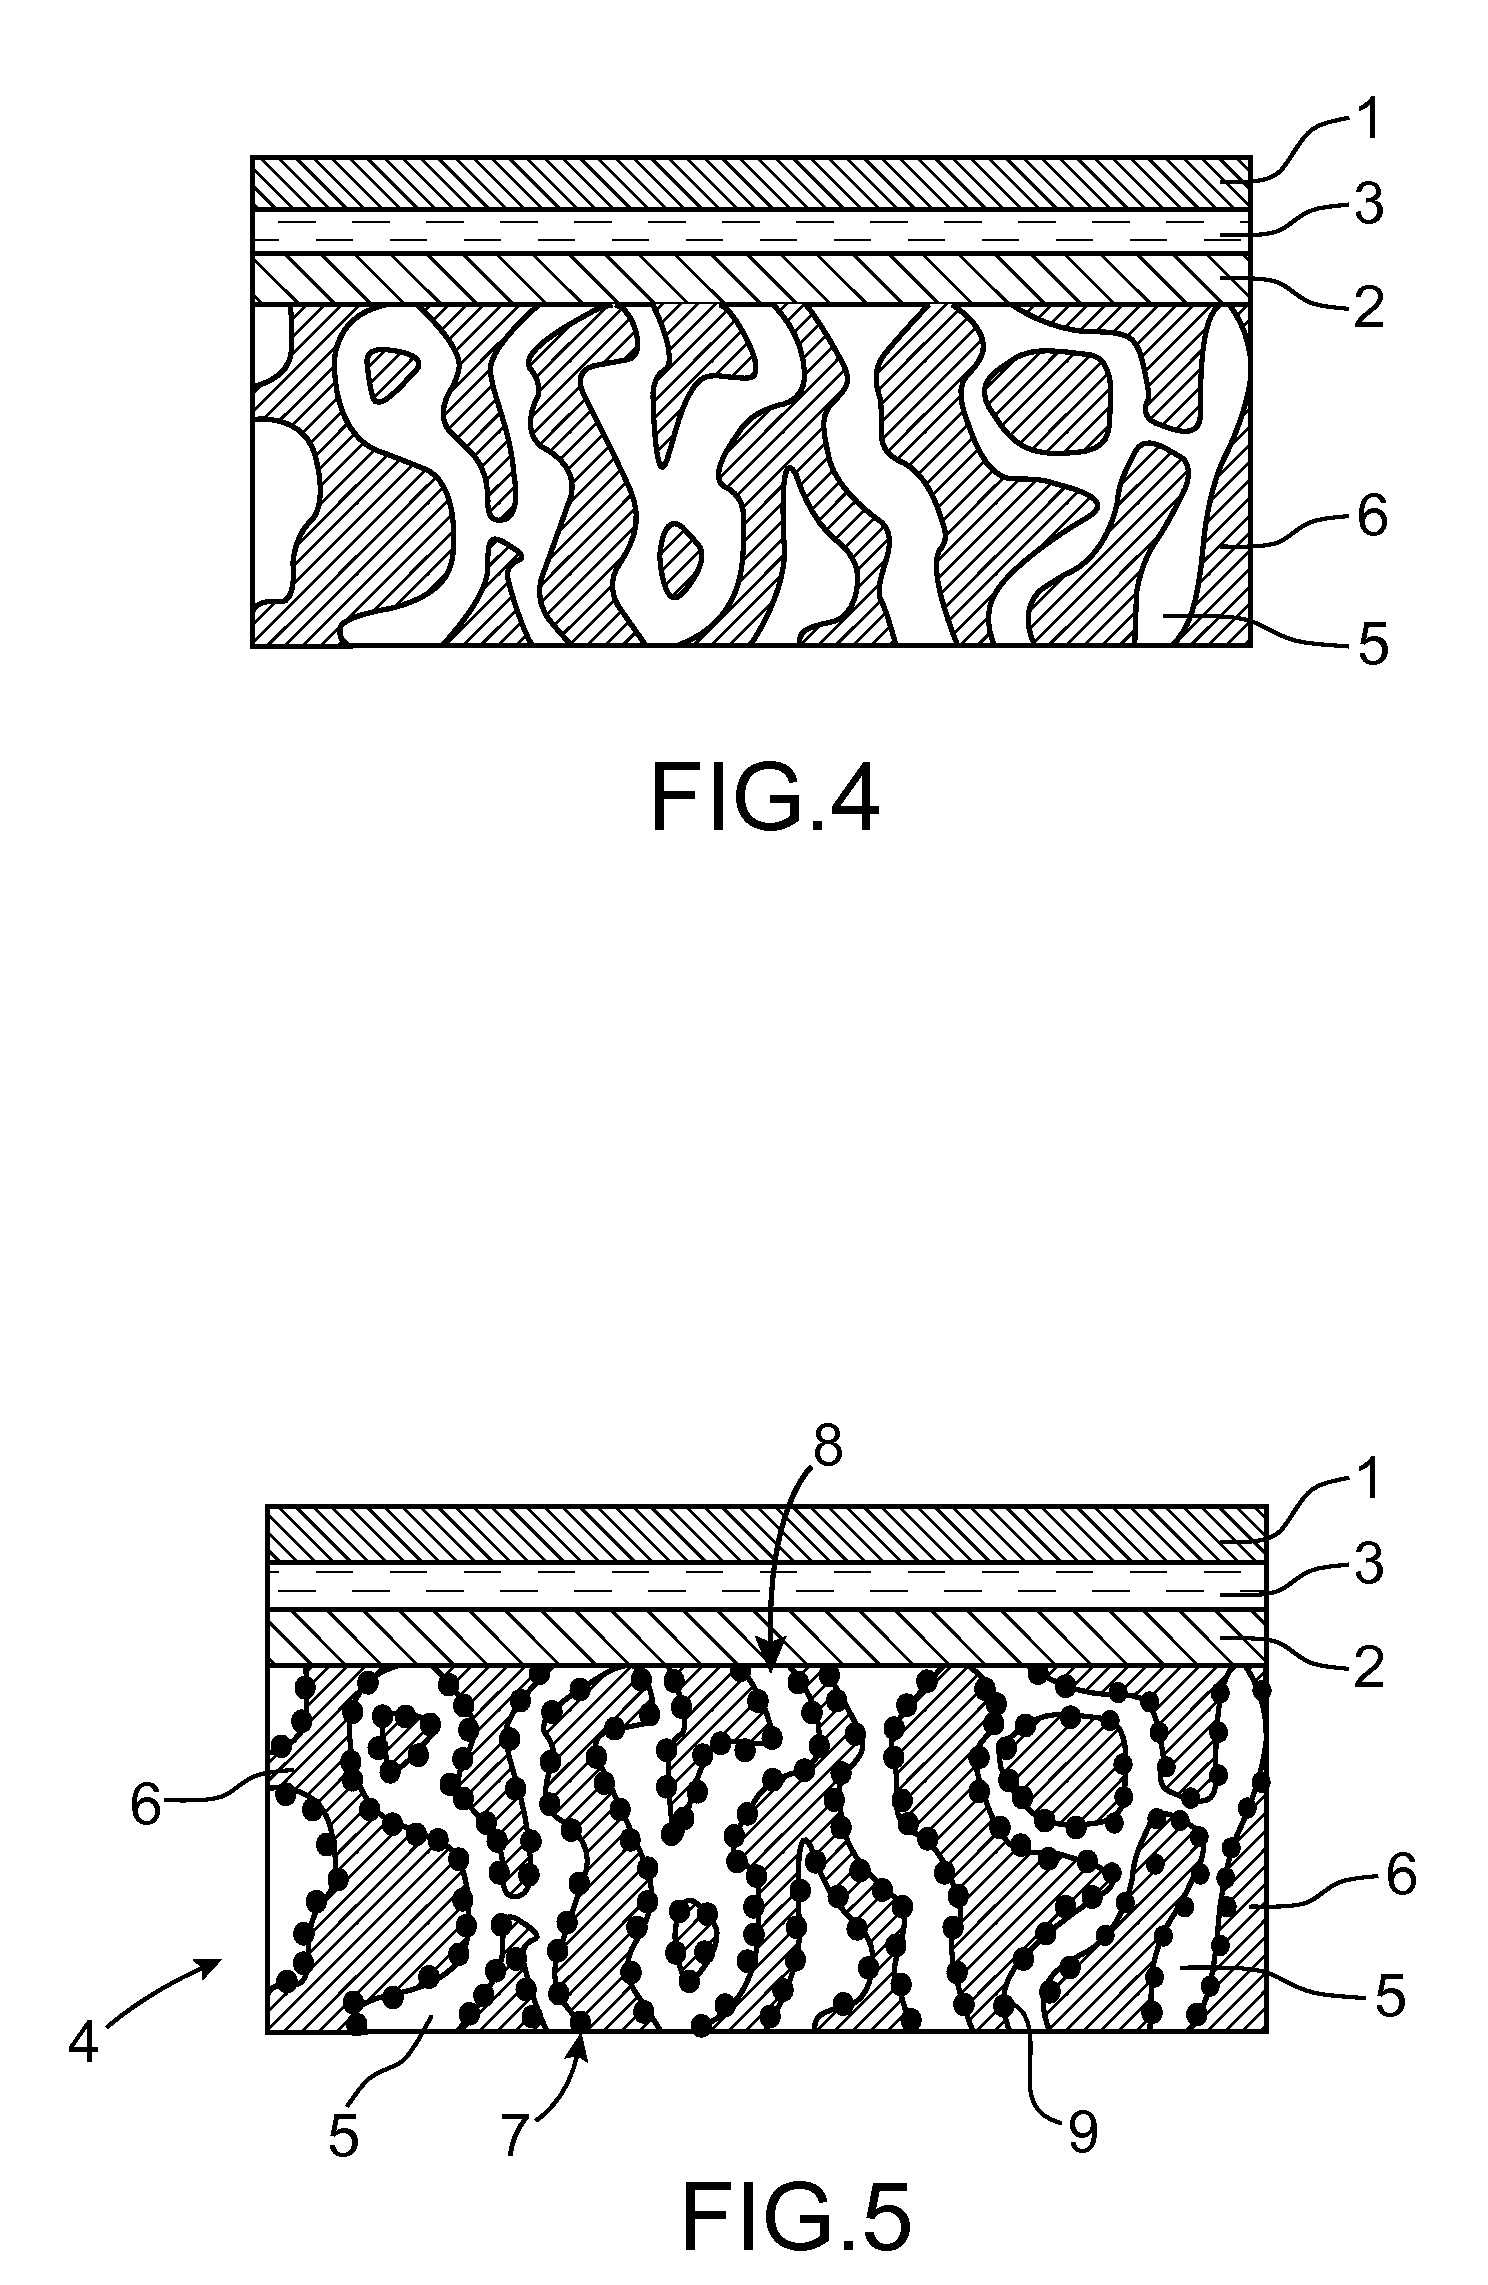 Cell of a high temperature fuel cell with internal reforming of hydrocarbons